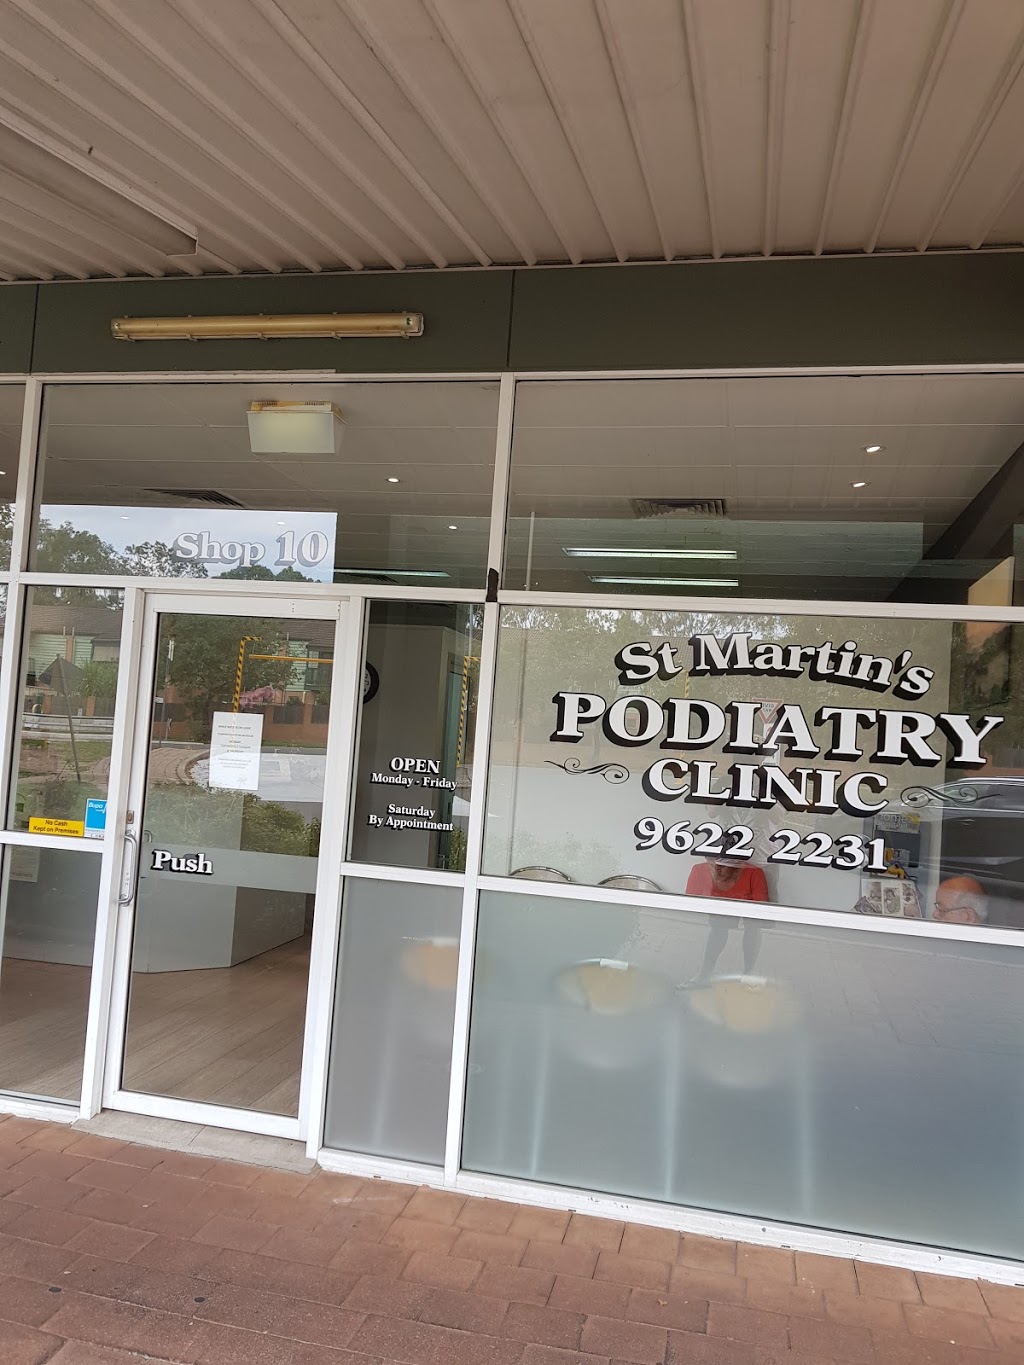 St Martins Podiatry Clinic | doctor | 10/6 St Martins Cres, Blacktown NSW 2148, Australia | 0296222231 OR +61 2 9622 2231